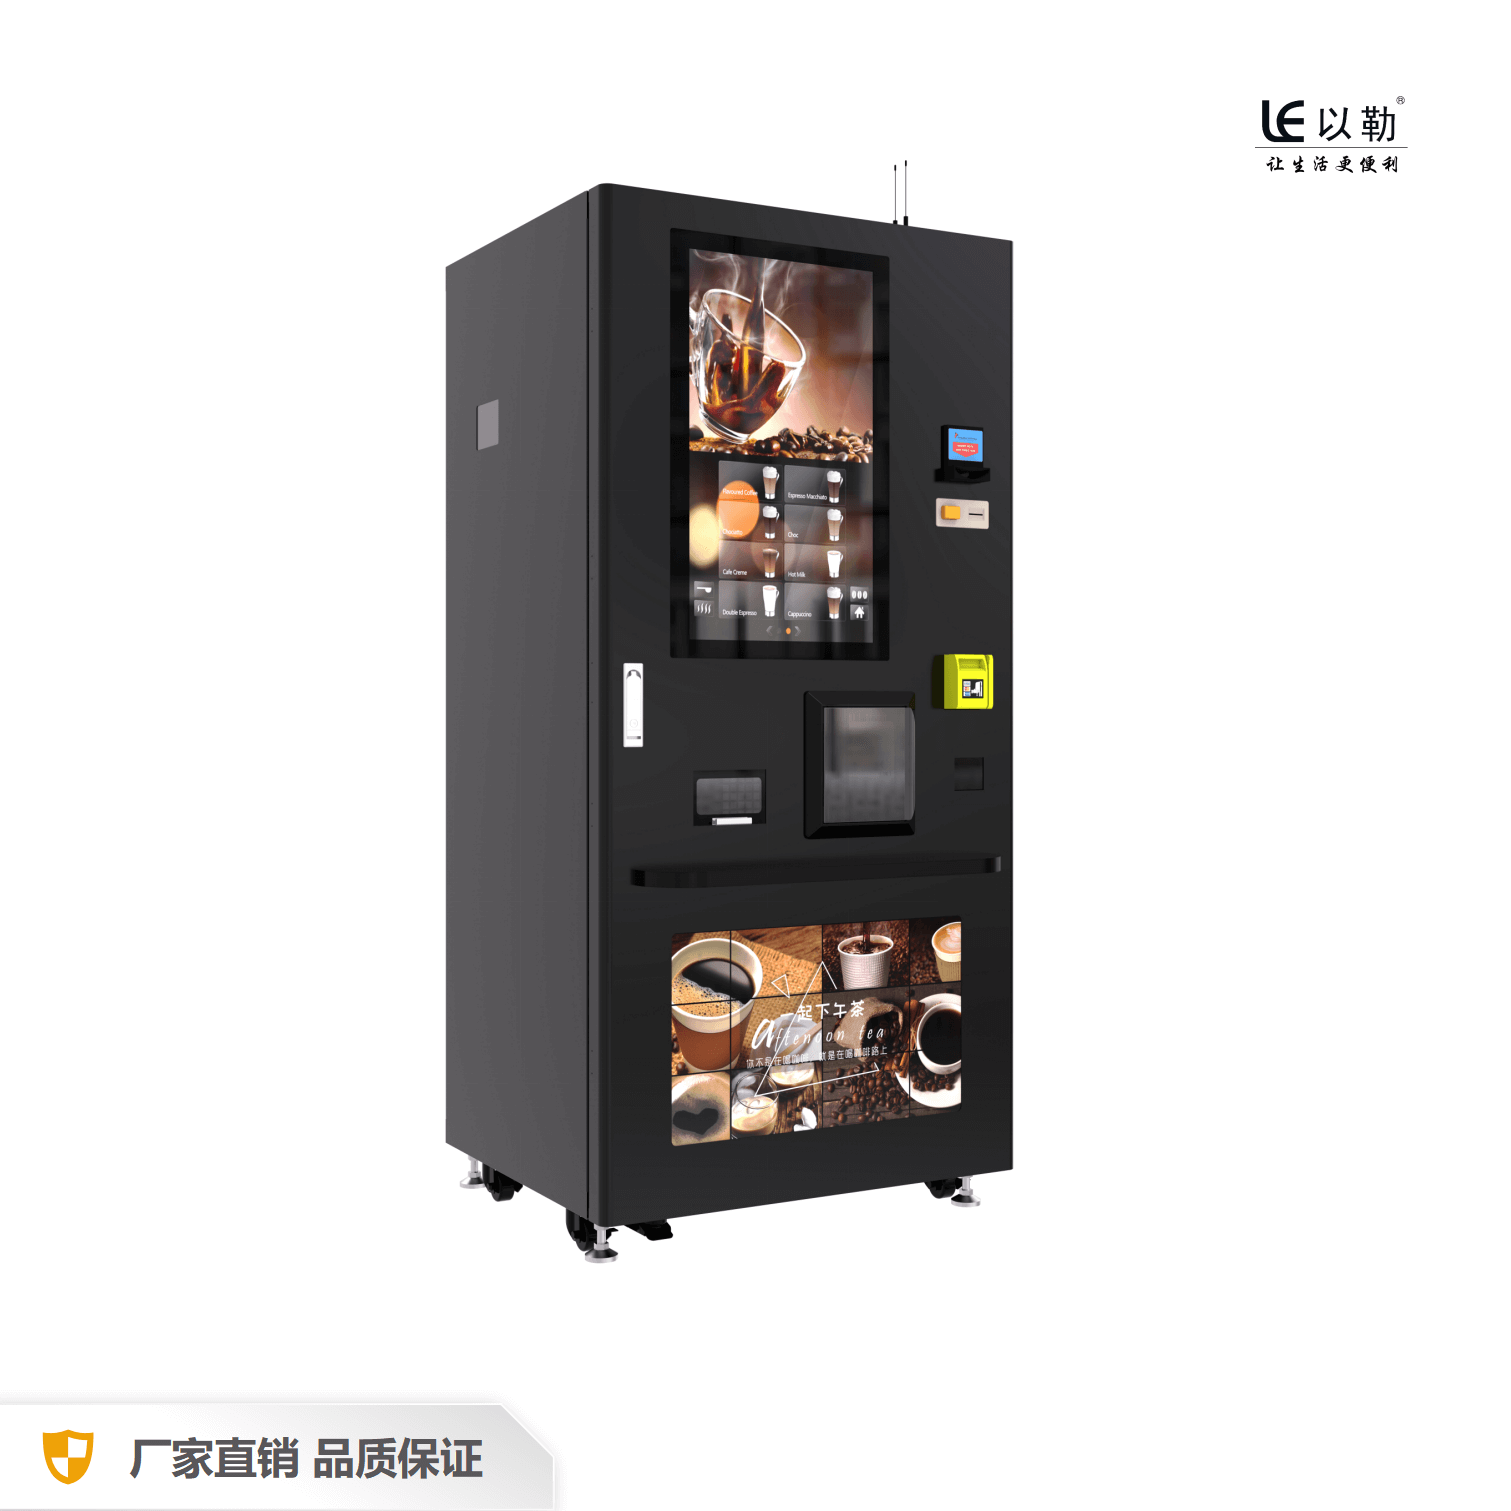 For Ice Coffee Automatic Coffee Vending Machine With Touch Screen